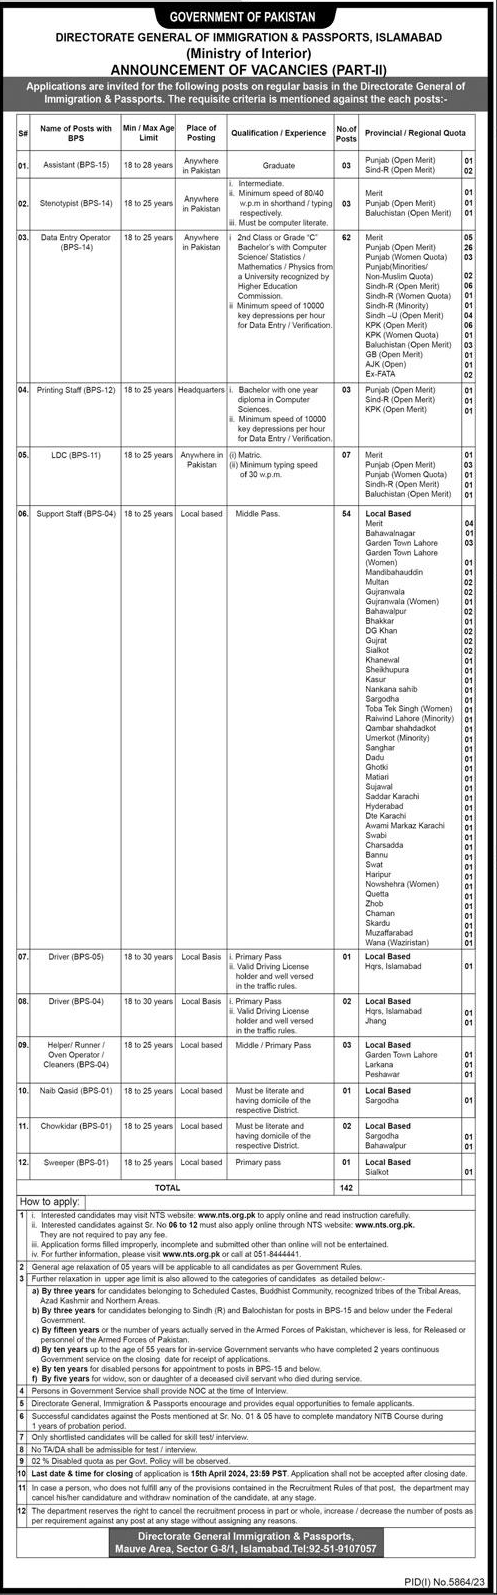 BPS-01 to BPS-15 Immigration and Passports Vacancies Part-II